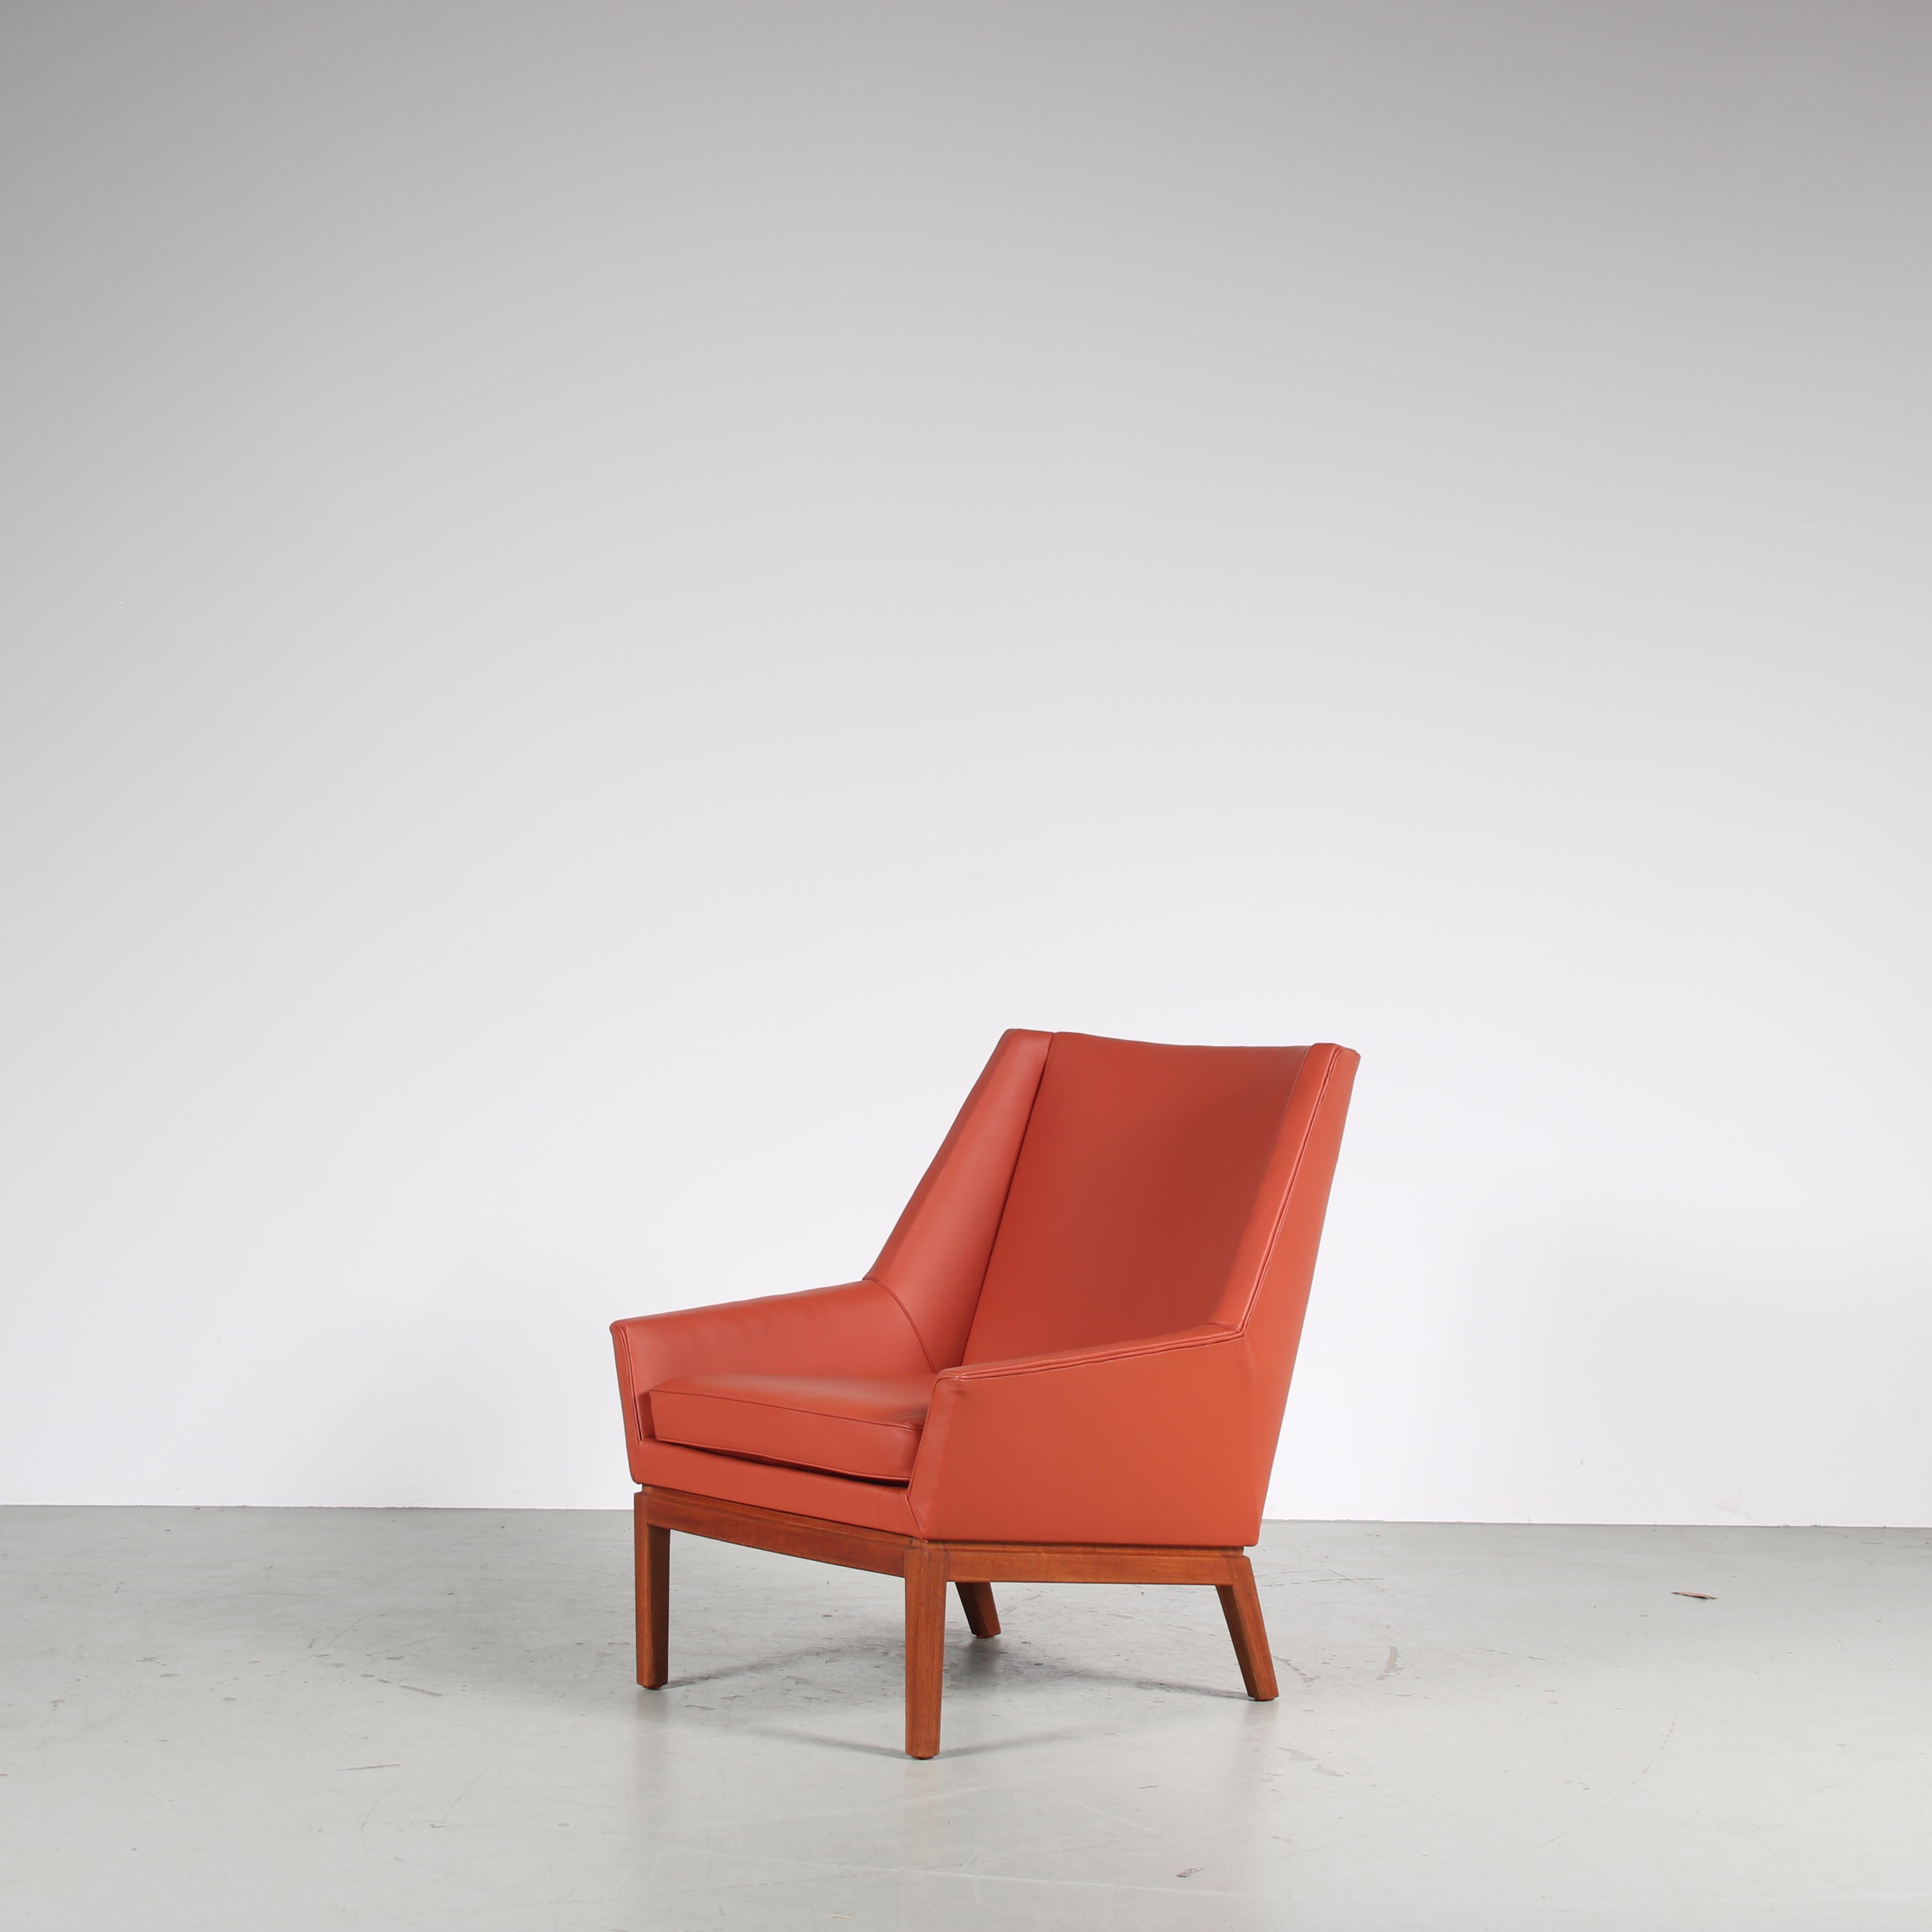 A beautiful lounge chair, model “Prism”, designed by Erik Kolling Andersen and manufactured by Peder Pedersen in Denmark around 1950.

This truly iconic piece has a very nice, rectangular yet ergonomic shape adds a sense of luxury and modernism to